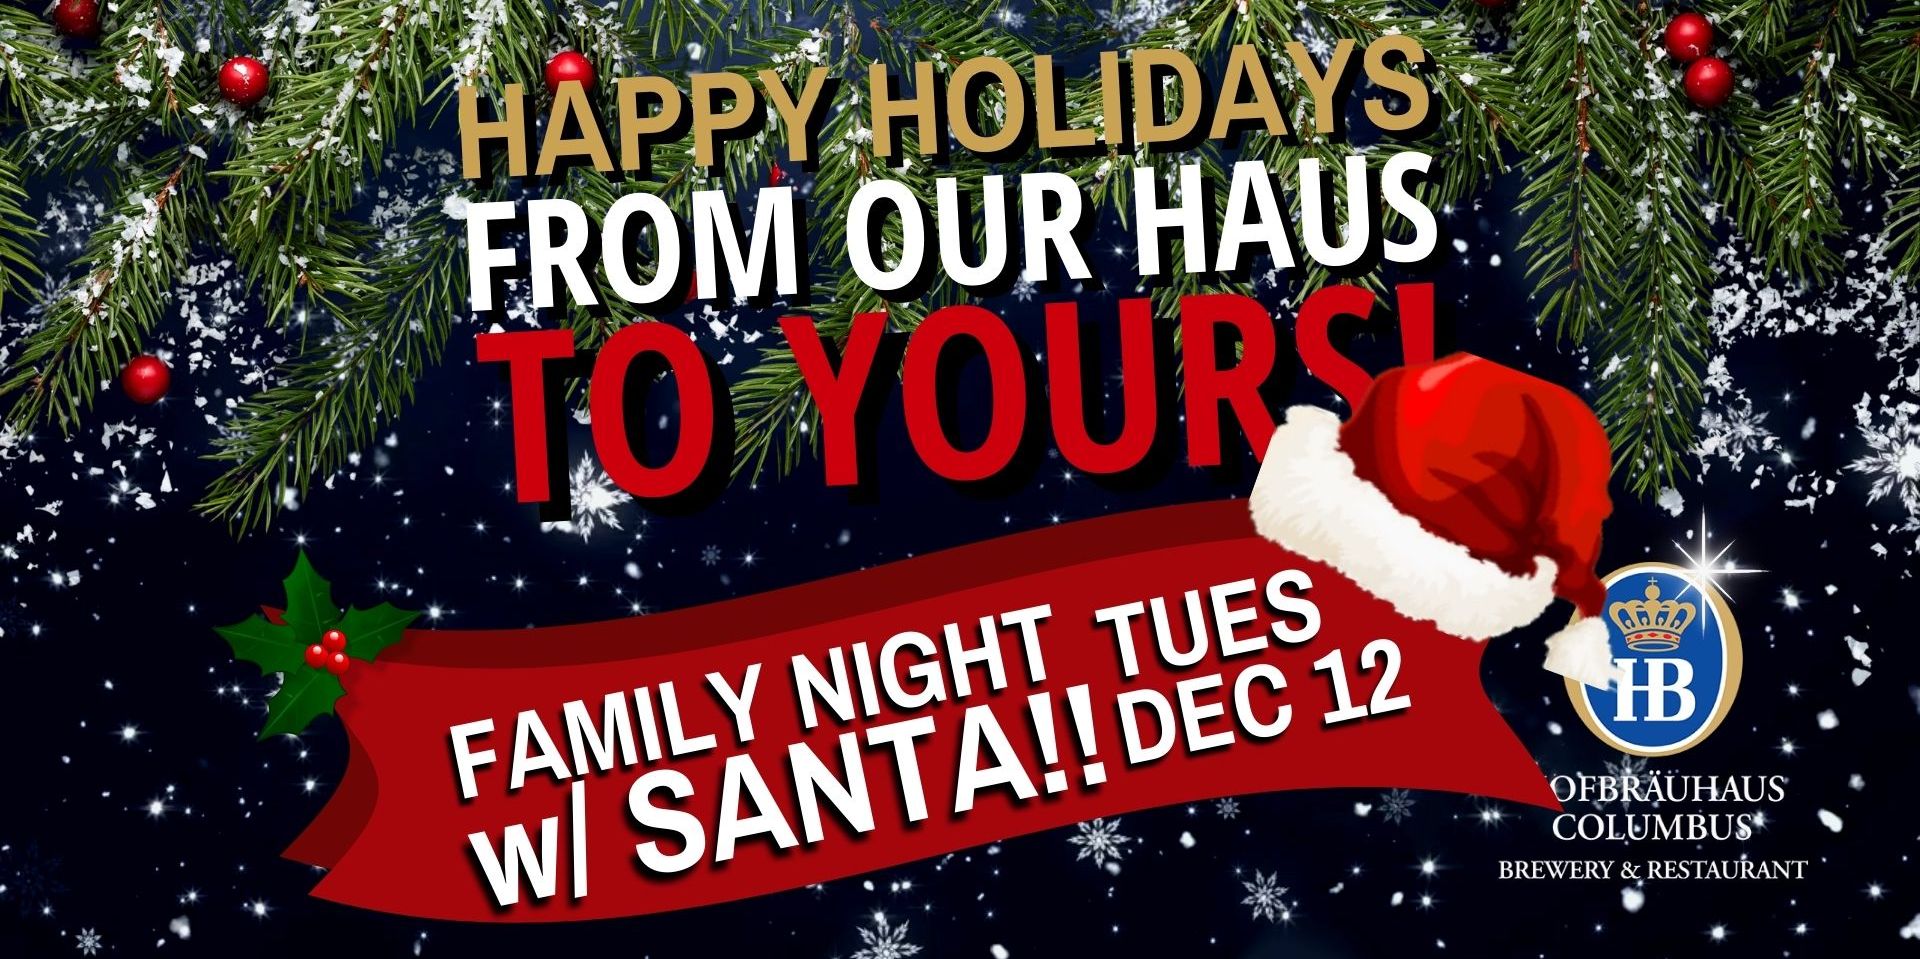 It's Our December Family Night w/ SANTA!! promotional image